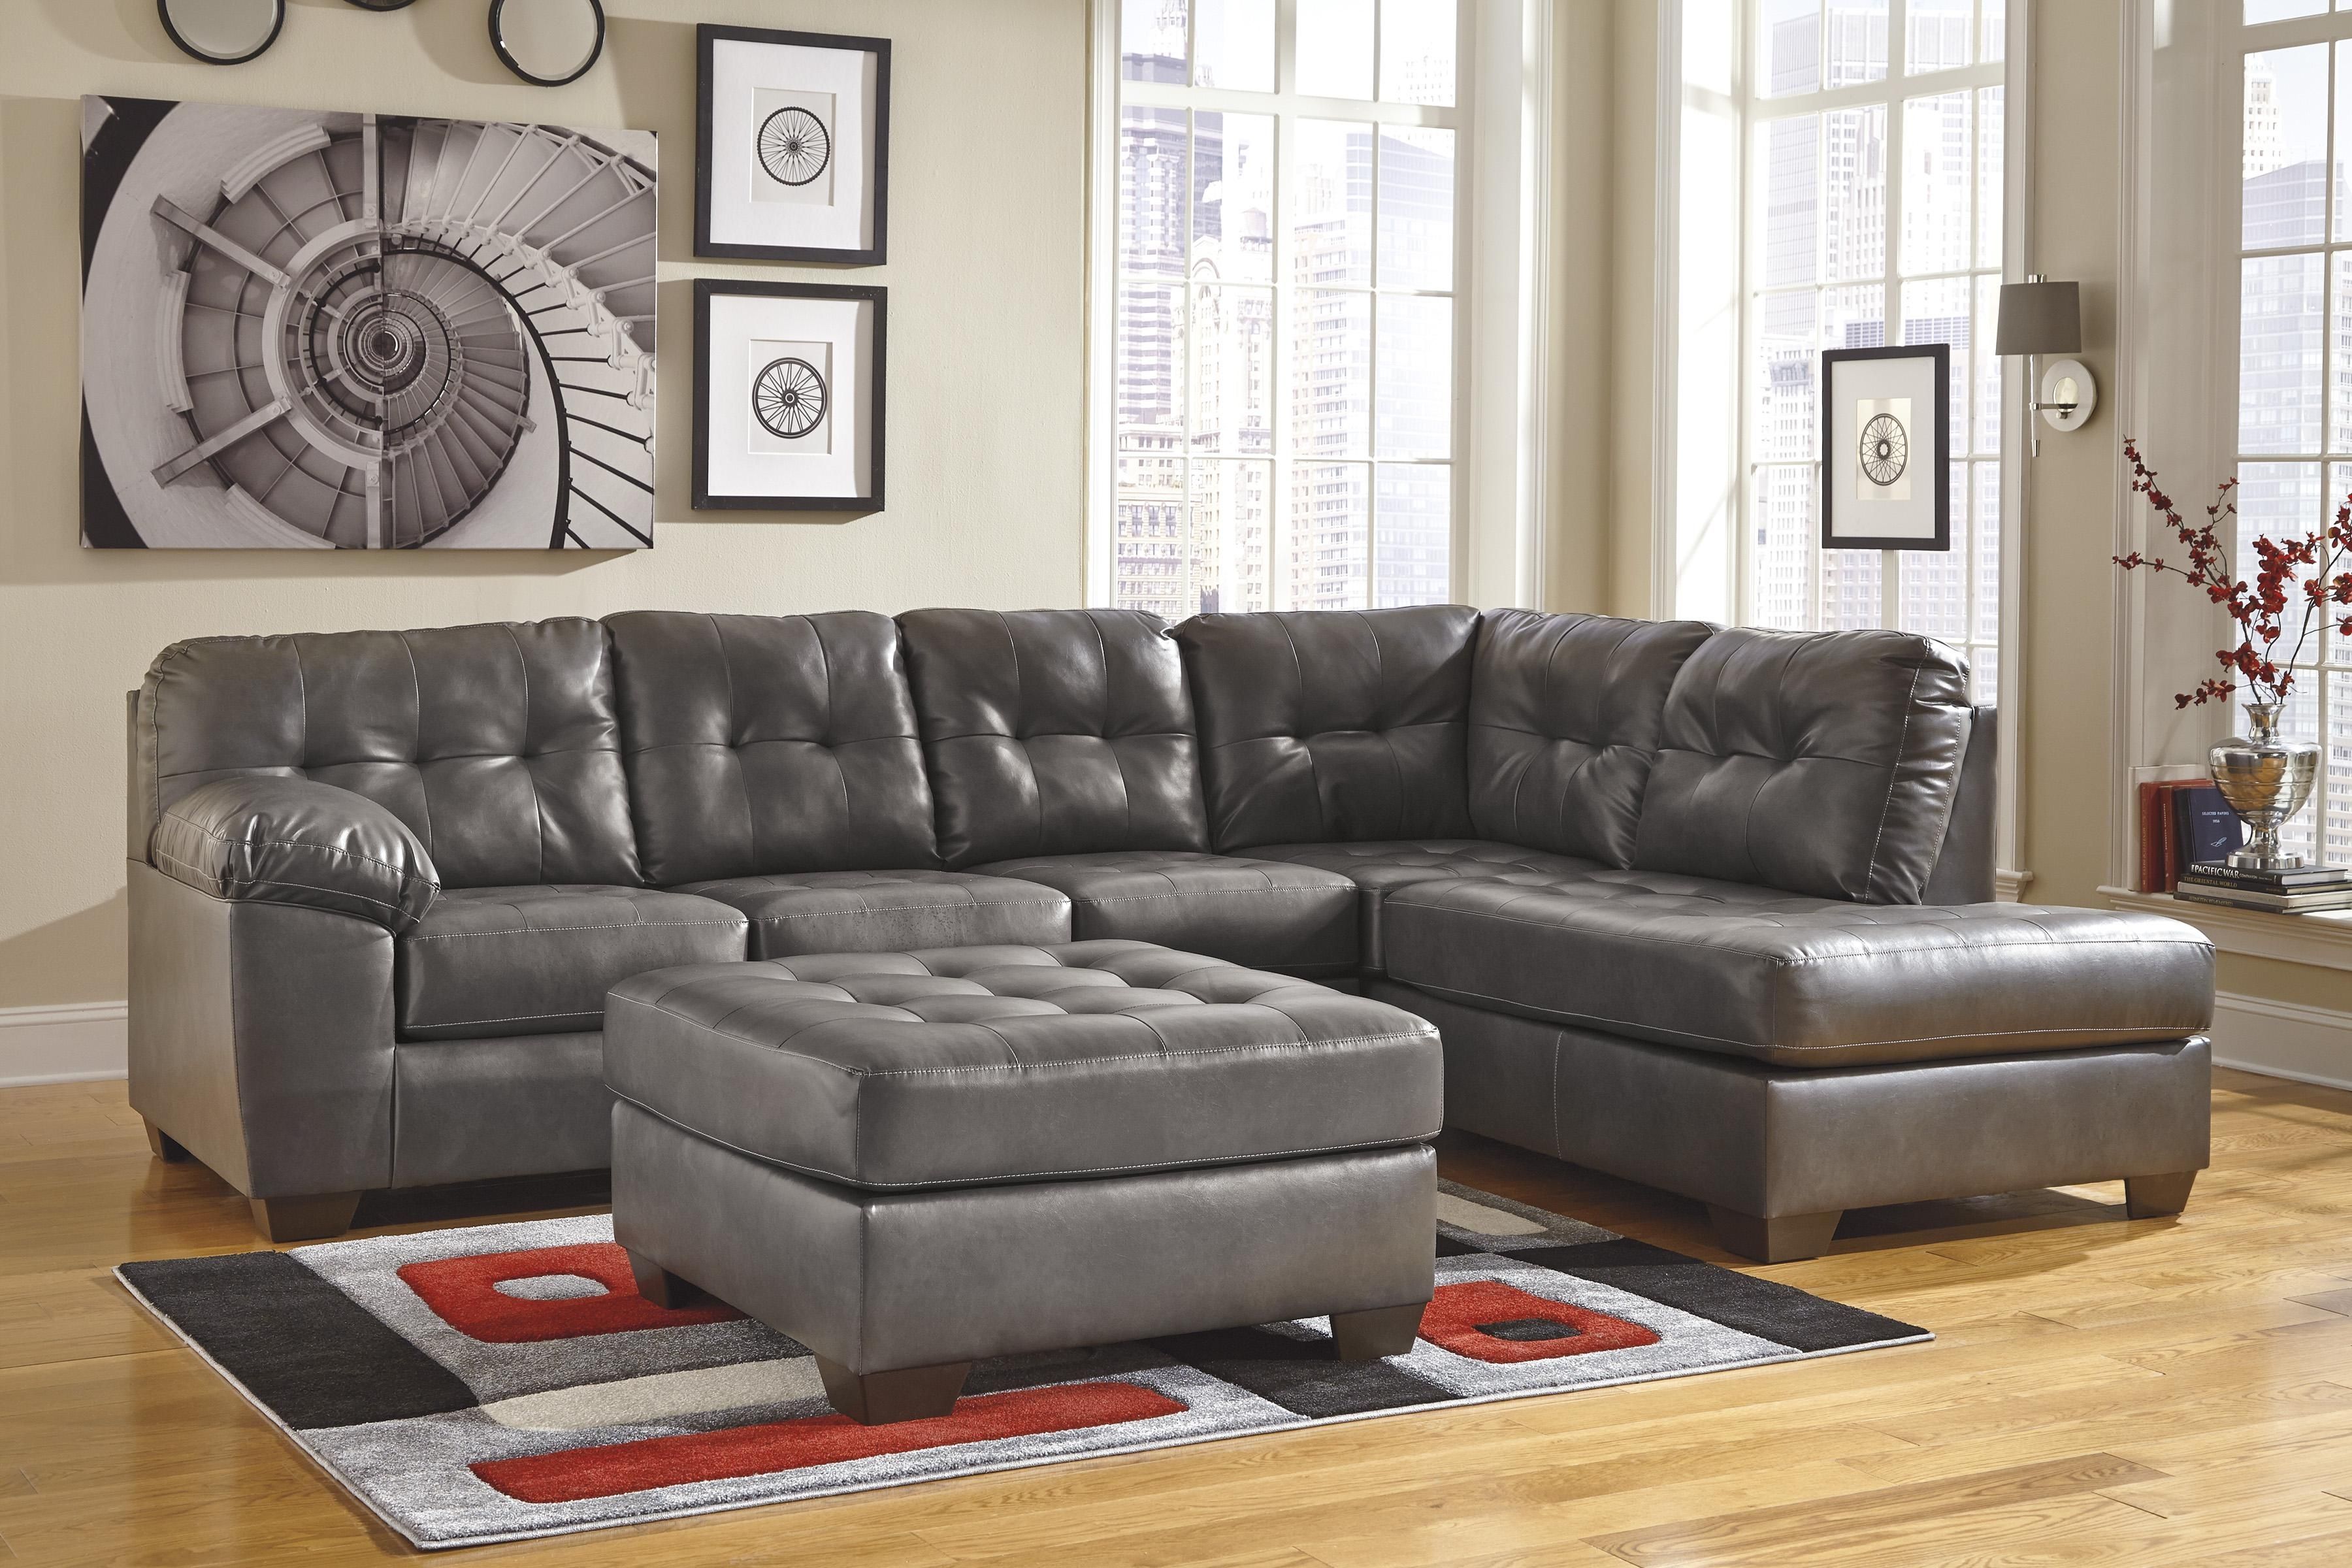 living room with 2 sectionals